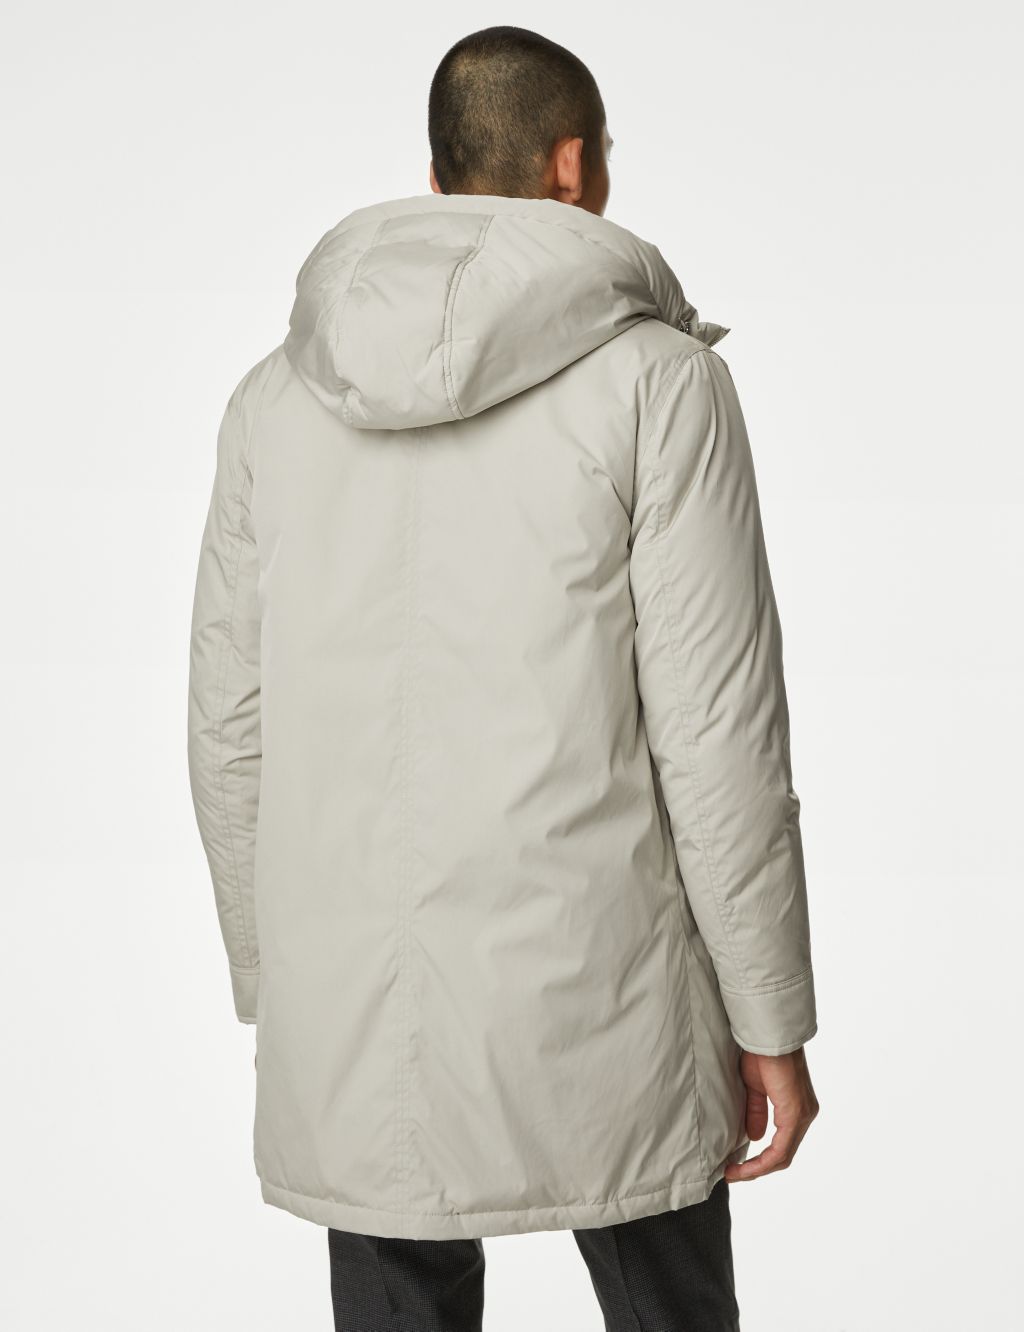 Hooded Feather and Down Parka Jacket with Stormwear™ image 6